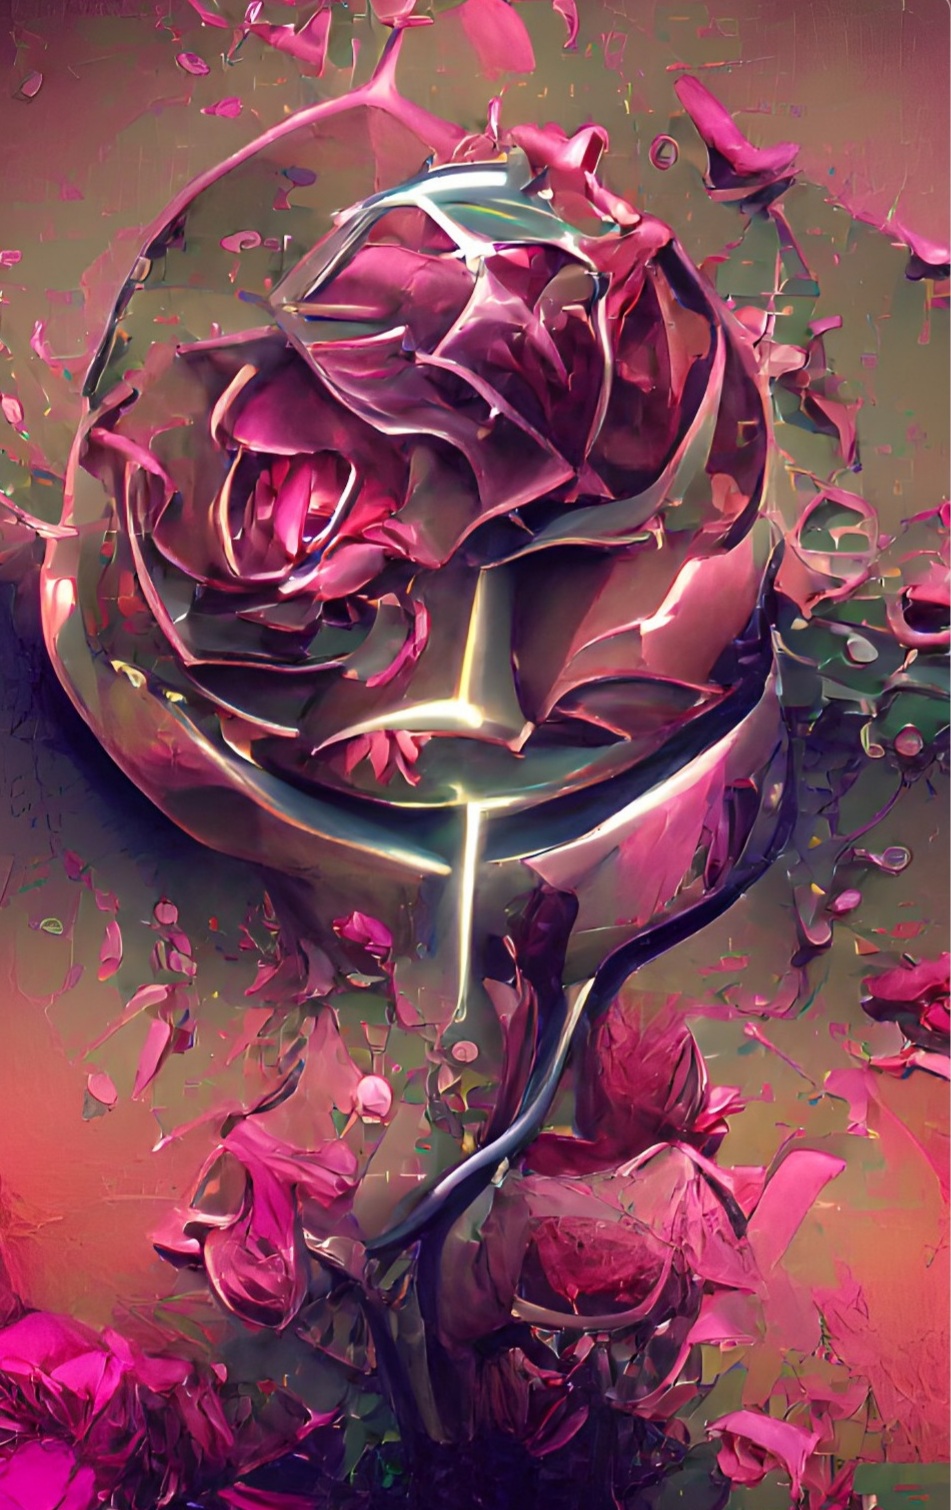 for the beauty of the rose